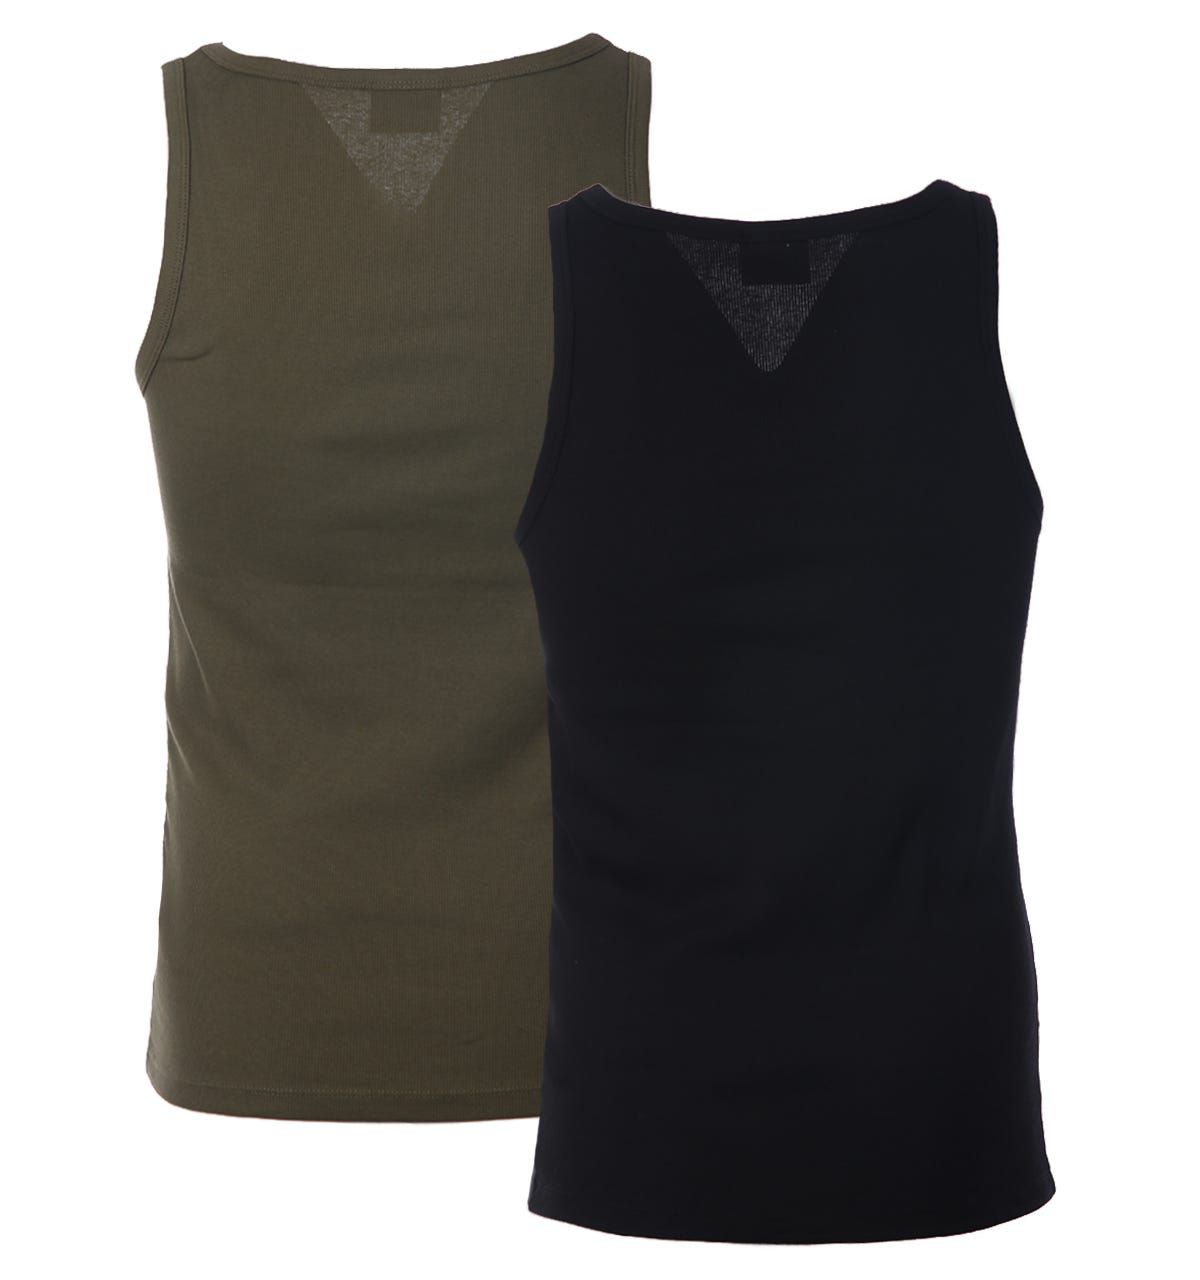 An essential for your wardrobe, this two-pack of vests from HUGO offers unmatched comfort that'll see you through the day. The slim fitting hugs the body, so it can be easily hidden underneath a shirt for that extra layer of warmth. Crafted from stretch cotton with a ribbed construction for optimum movement and breathability. Finished with signature HUGO branding. Two Pack, Slim Fit , Stretch Cotton, Ribbed Construction , Round Neckline, HUGO Branding . Composition & Care:95% Cotton 5% Elastane, Machine Wash.